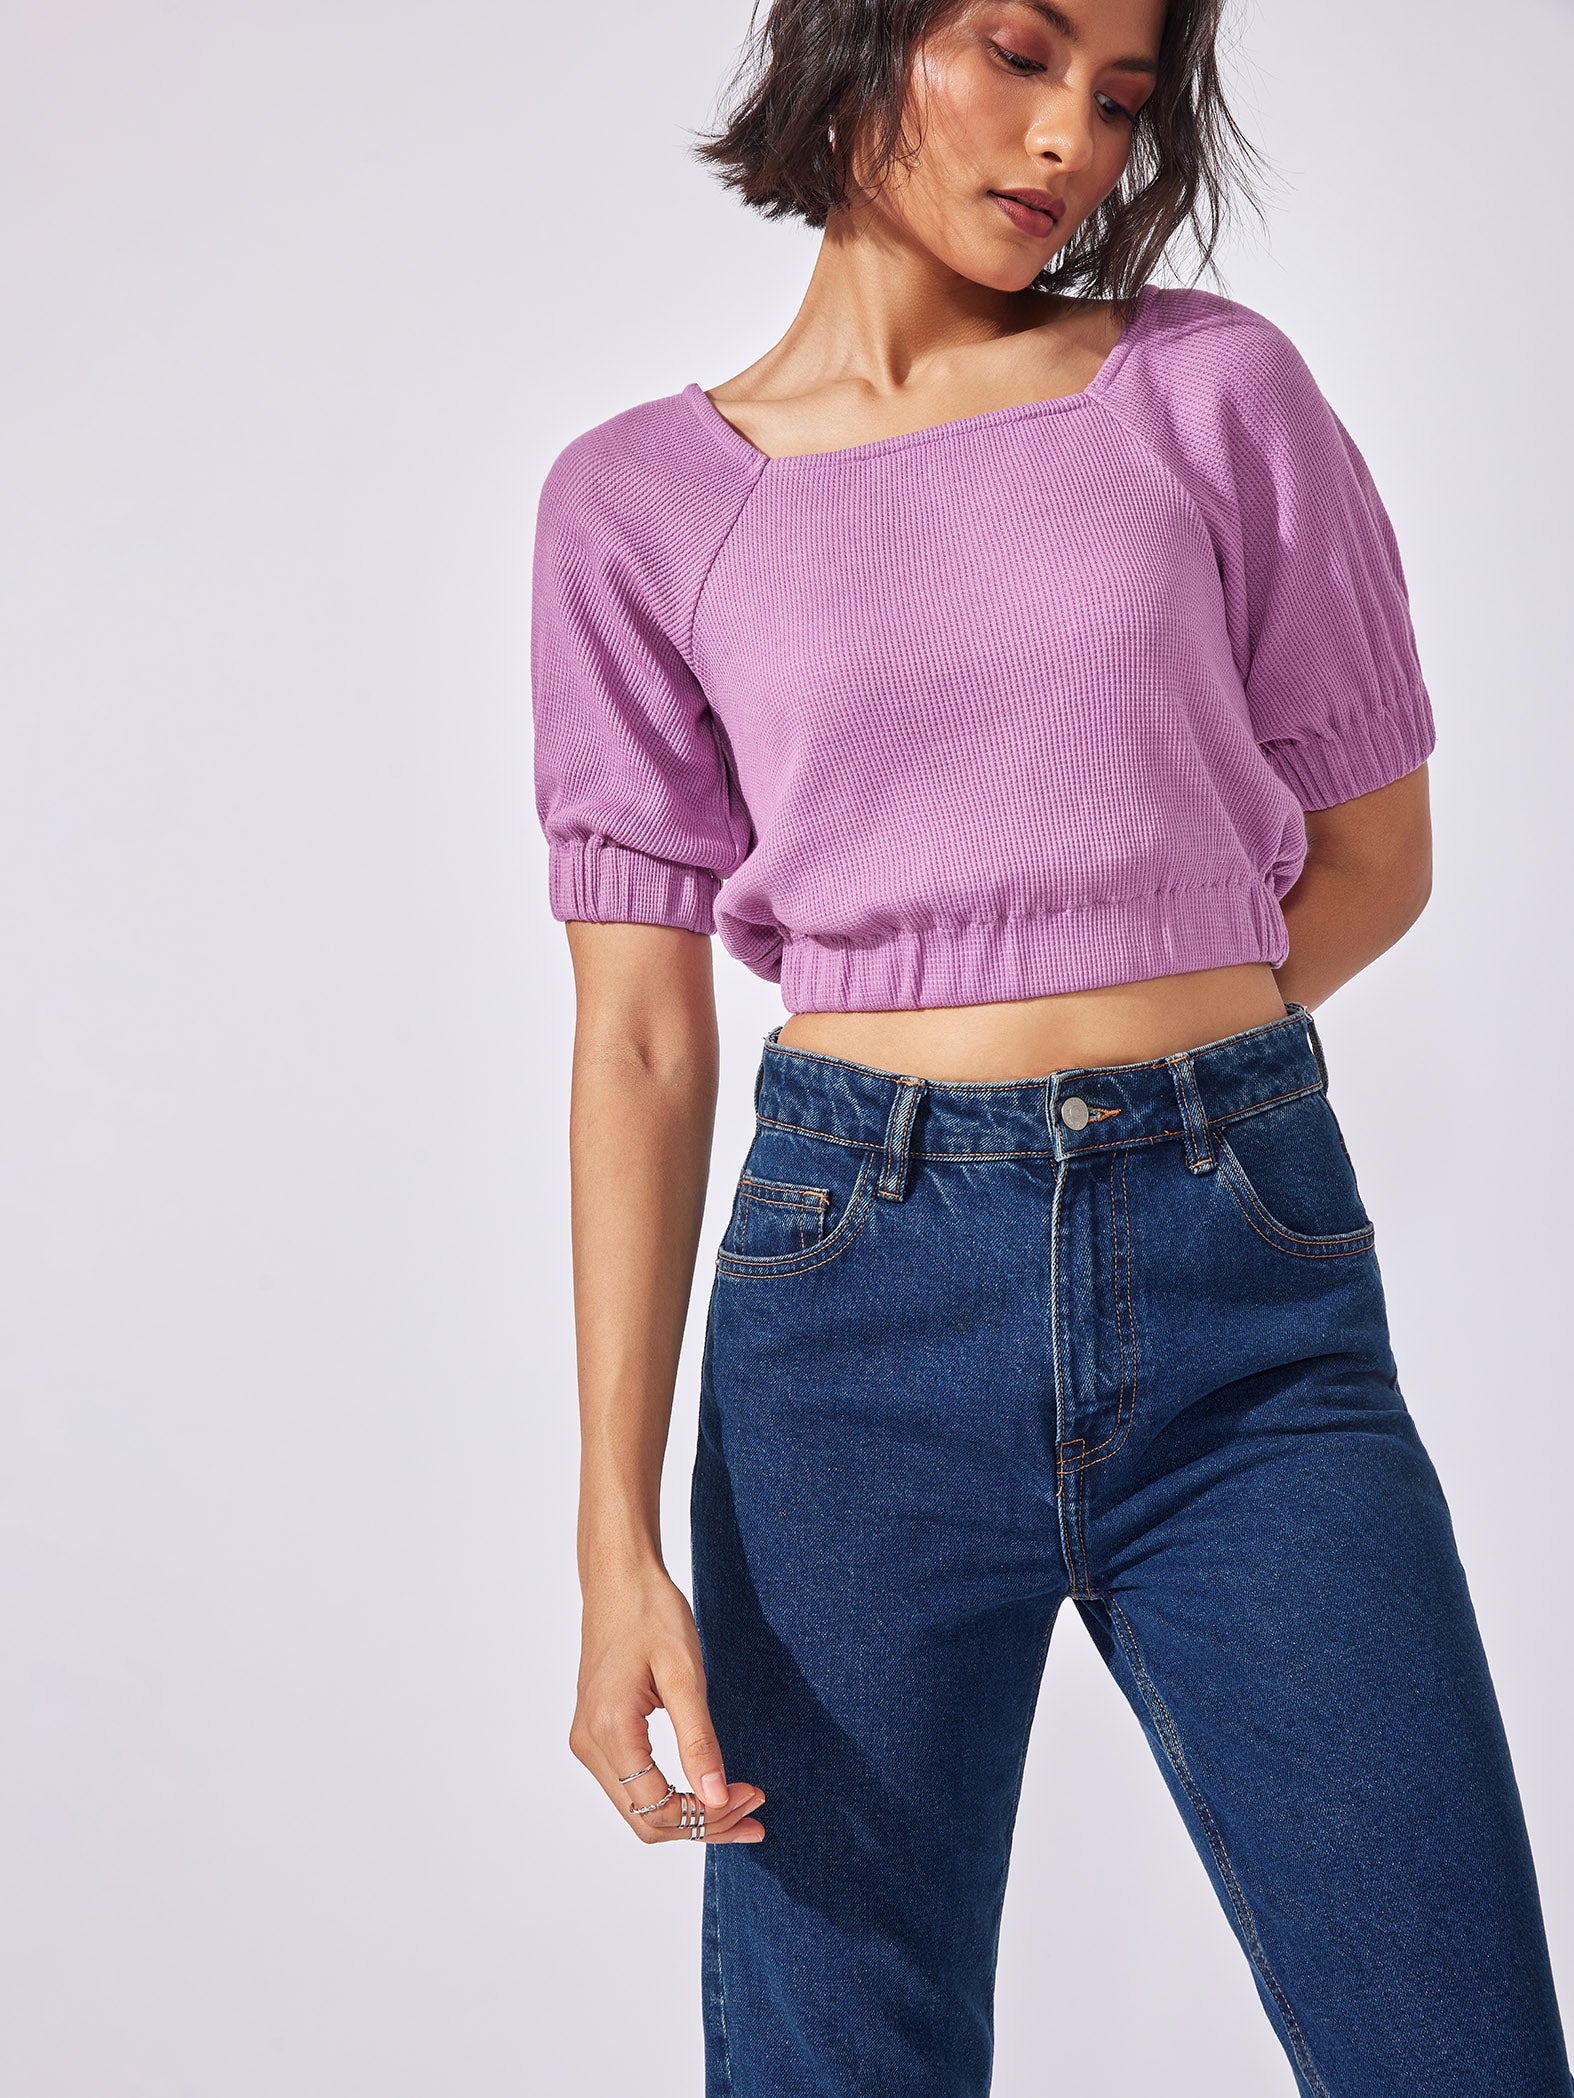 Orchid Square Neck Top